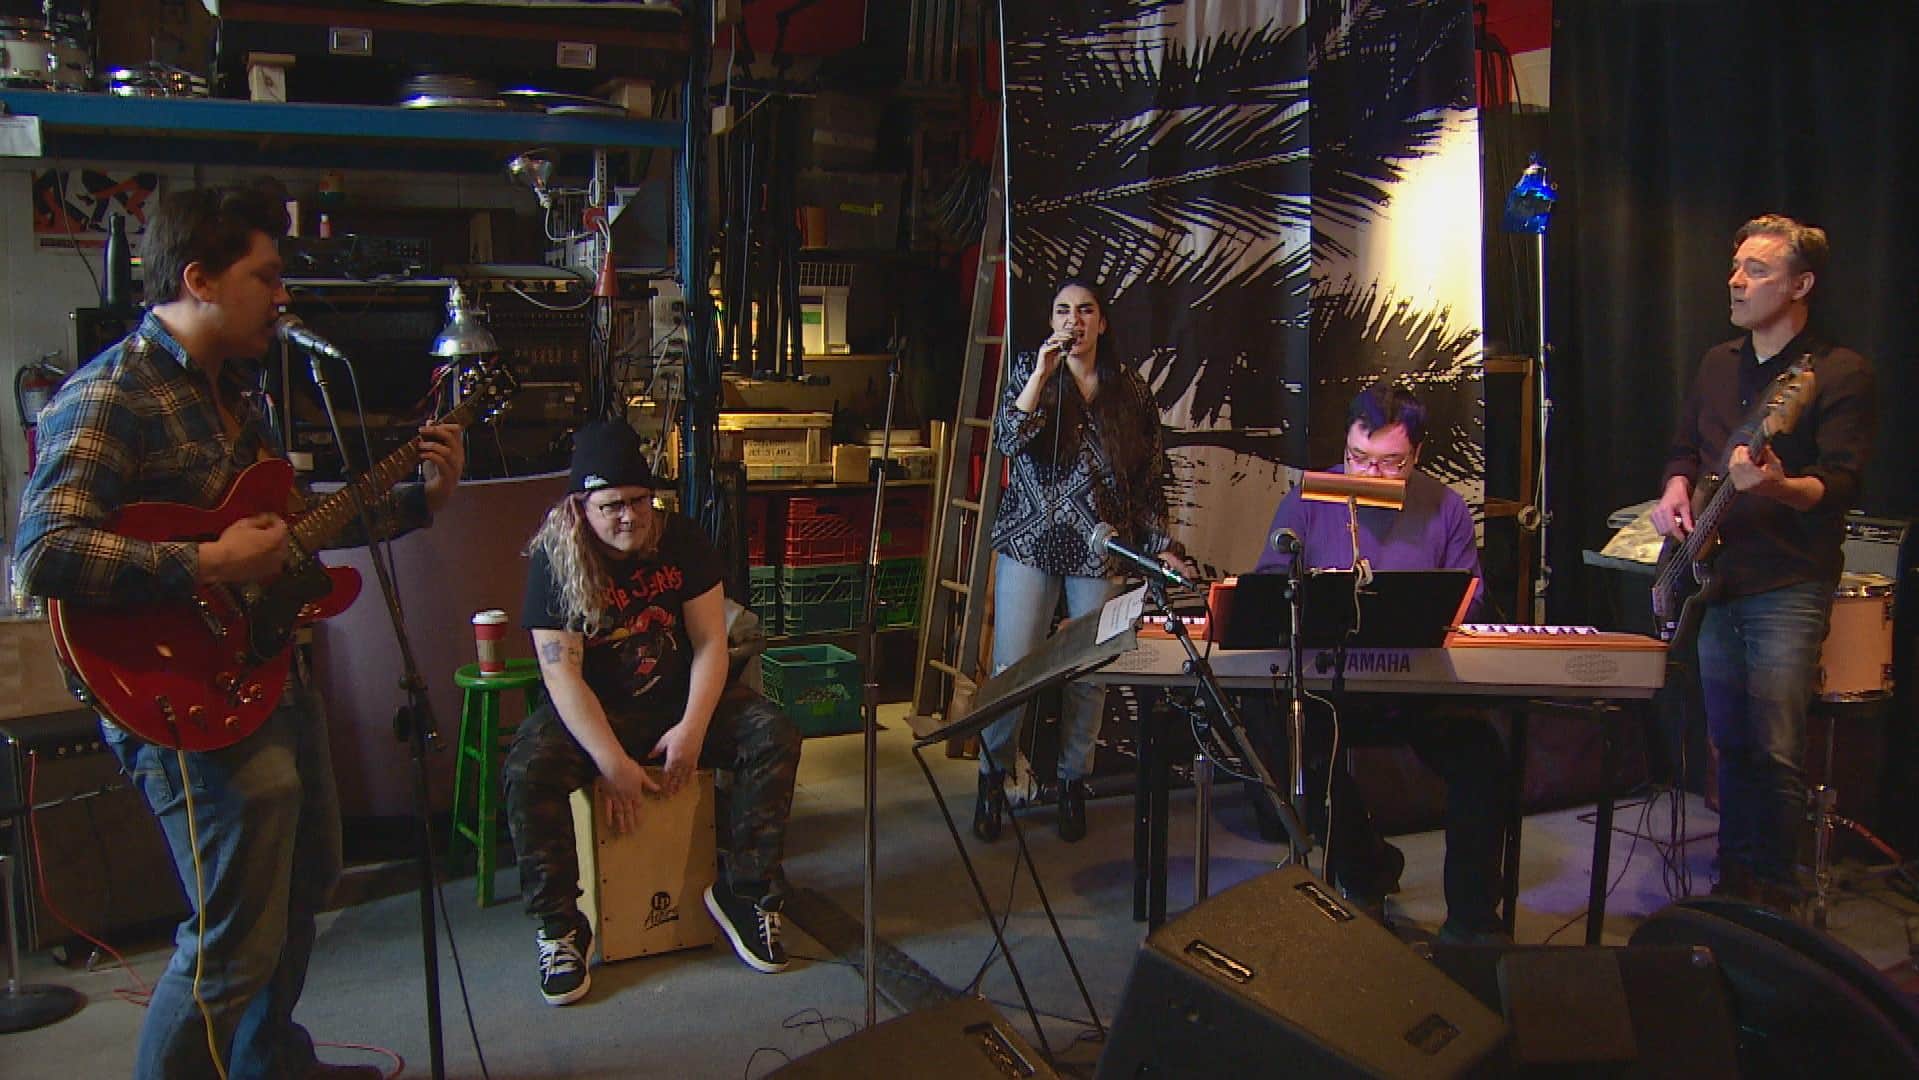 A new Canadian doc follows four musicians on the autism spectrum as they release an EP